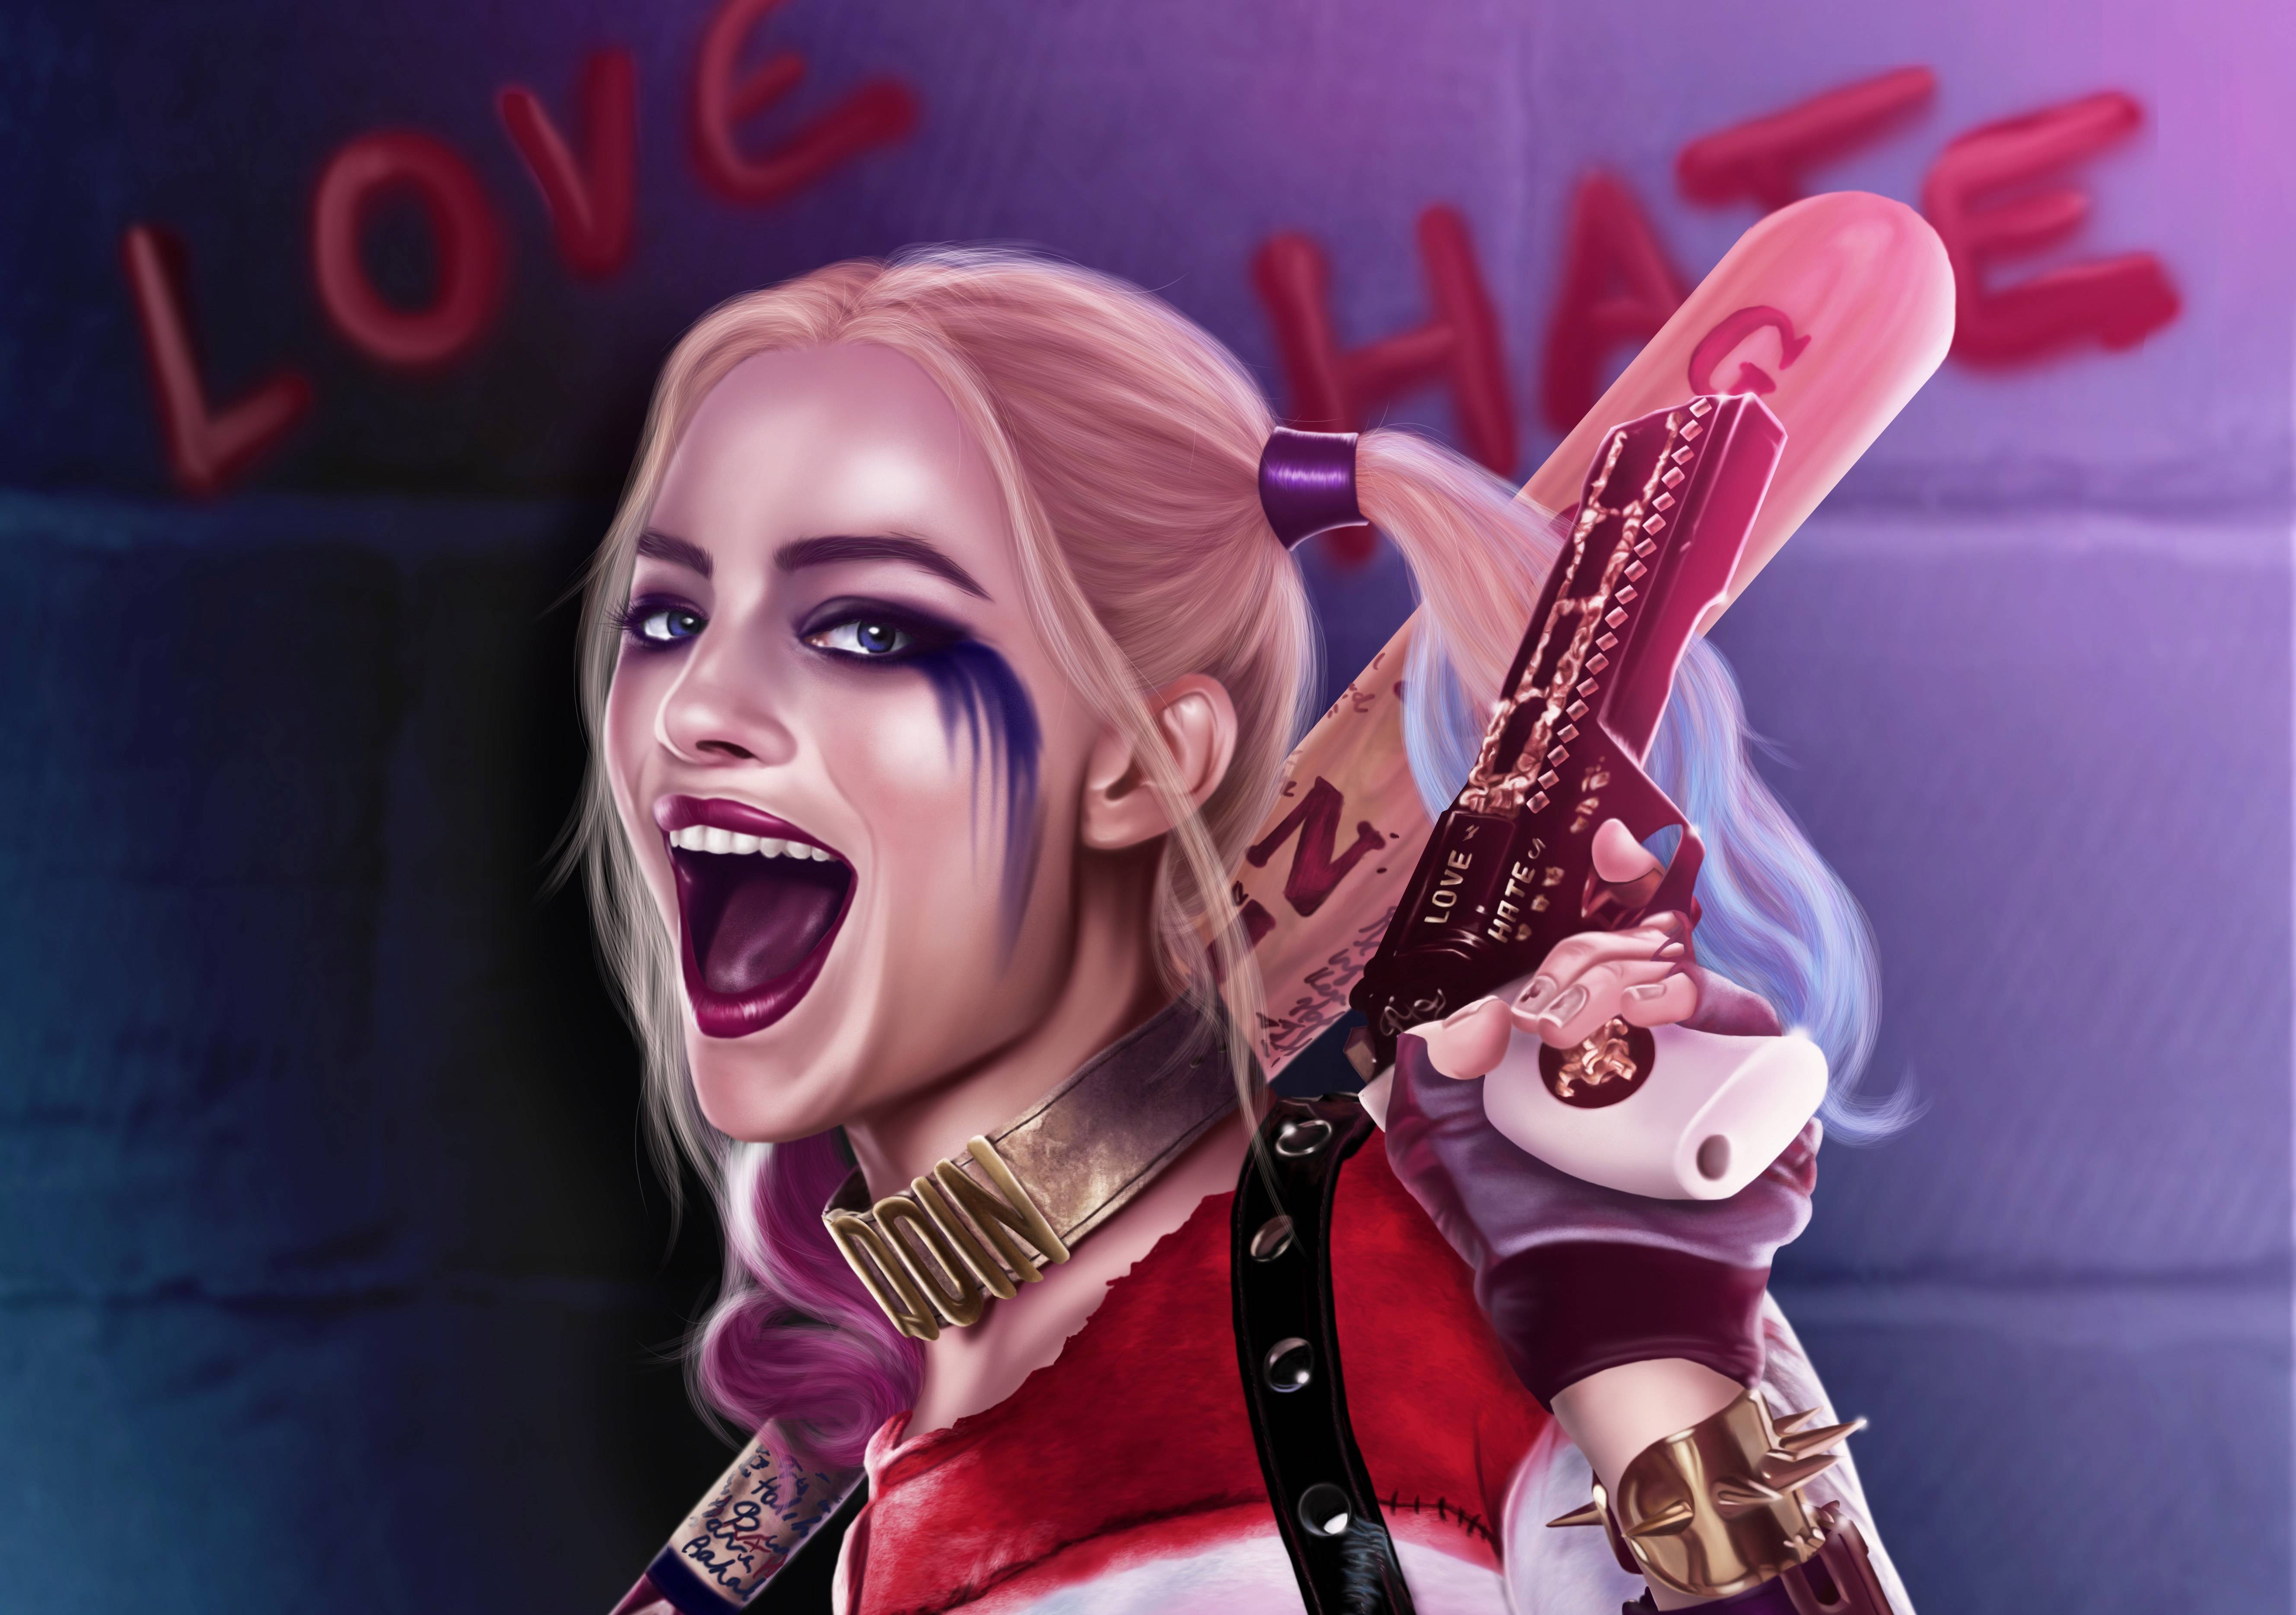 harley quinn wallpaper hd,fictional character,cool,mouth,action figure,music artist